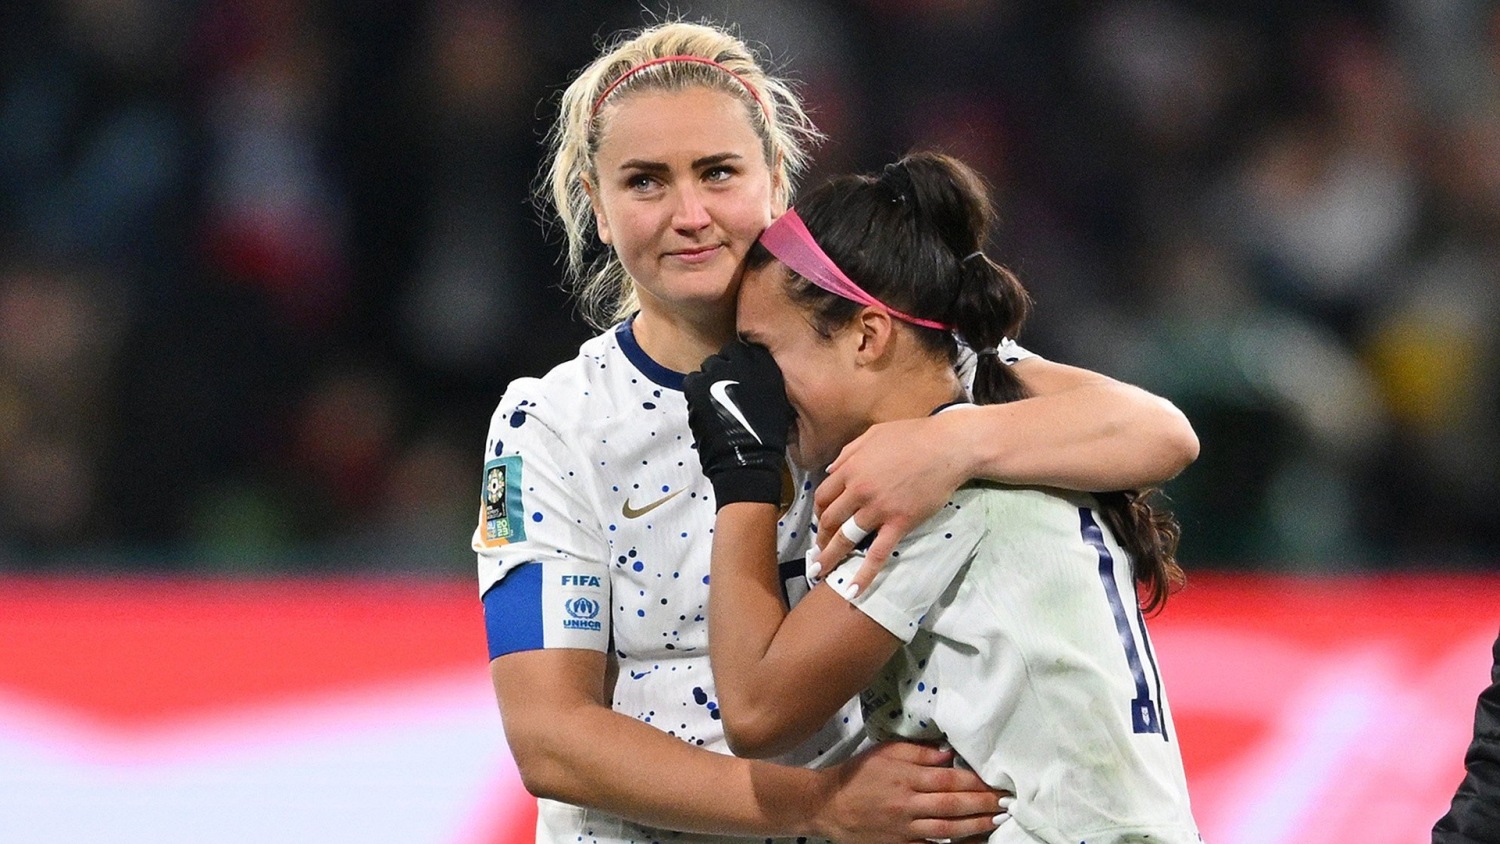 US loses to Sweden on penalty kicks in its earliest Women's World Cup exit  ever - Indianapolis News, Indiana Weather, Indiana Traffic, WISH-TV